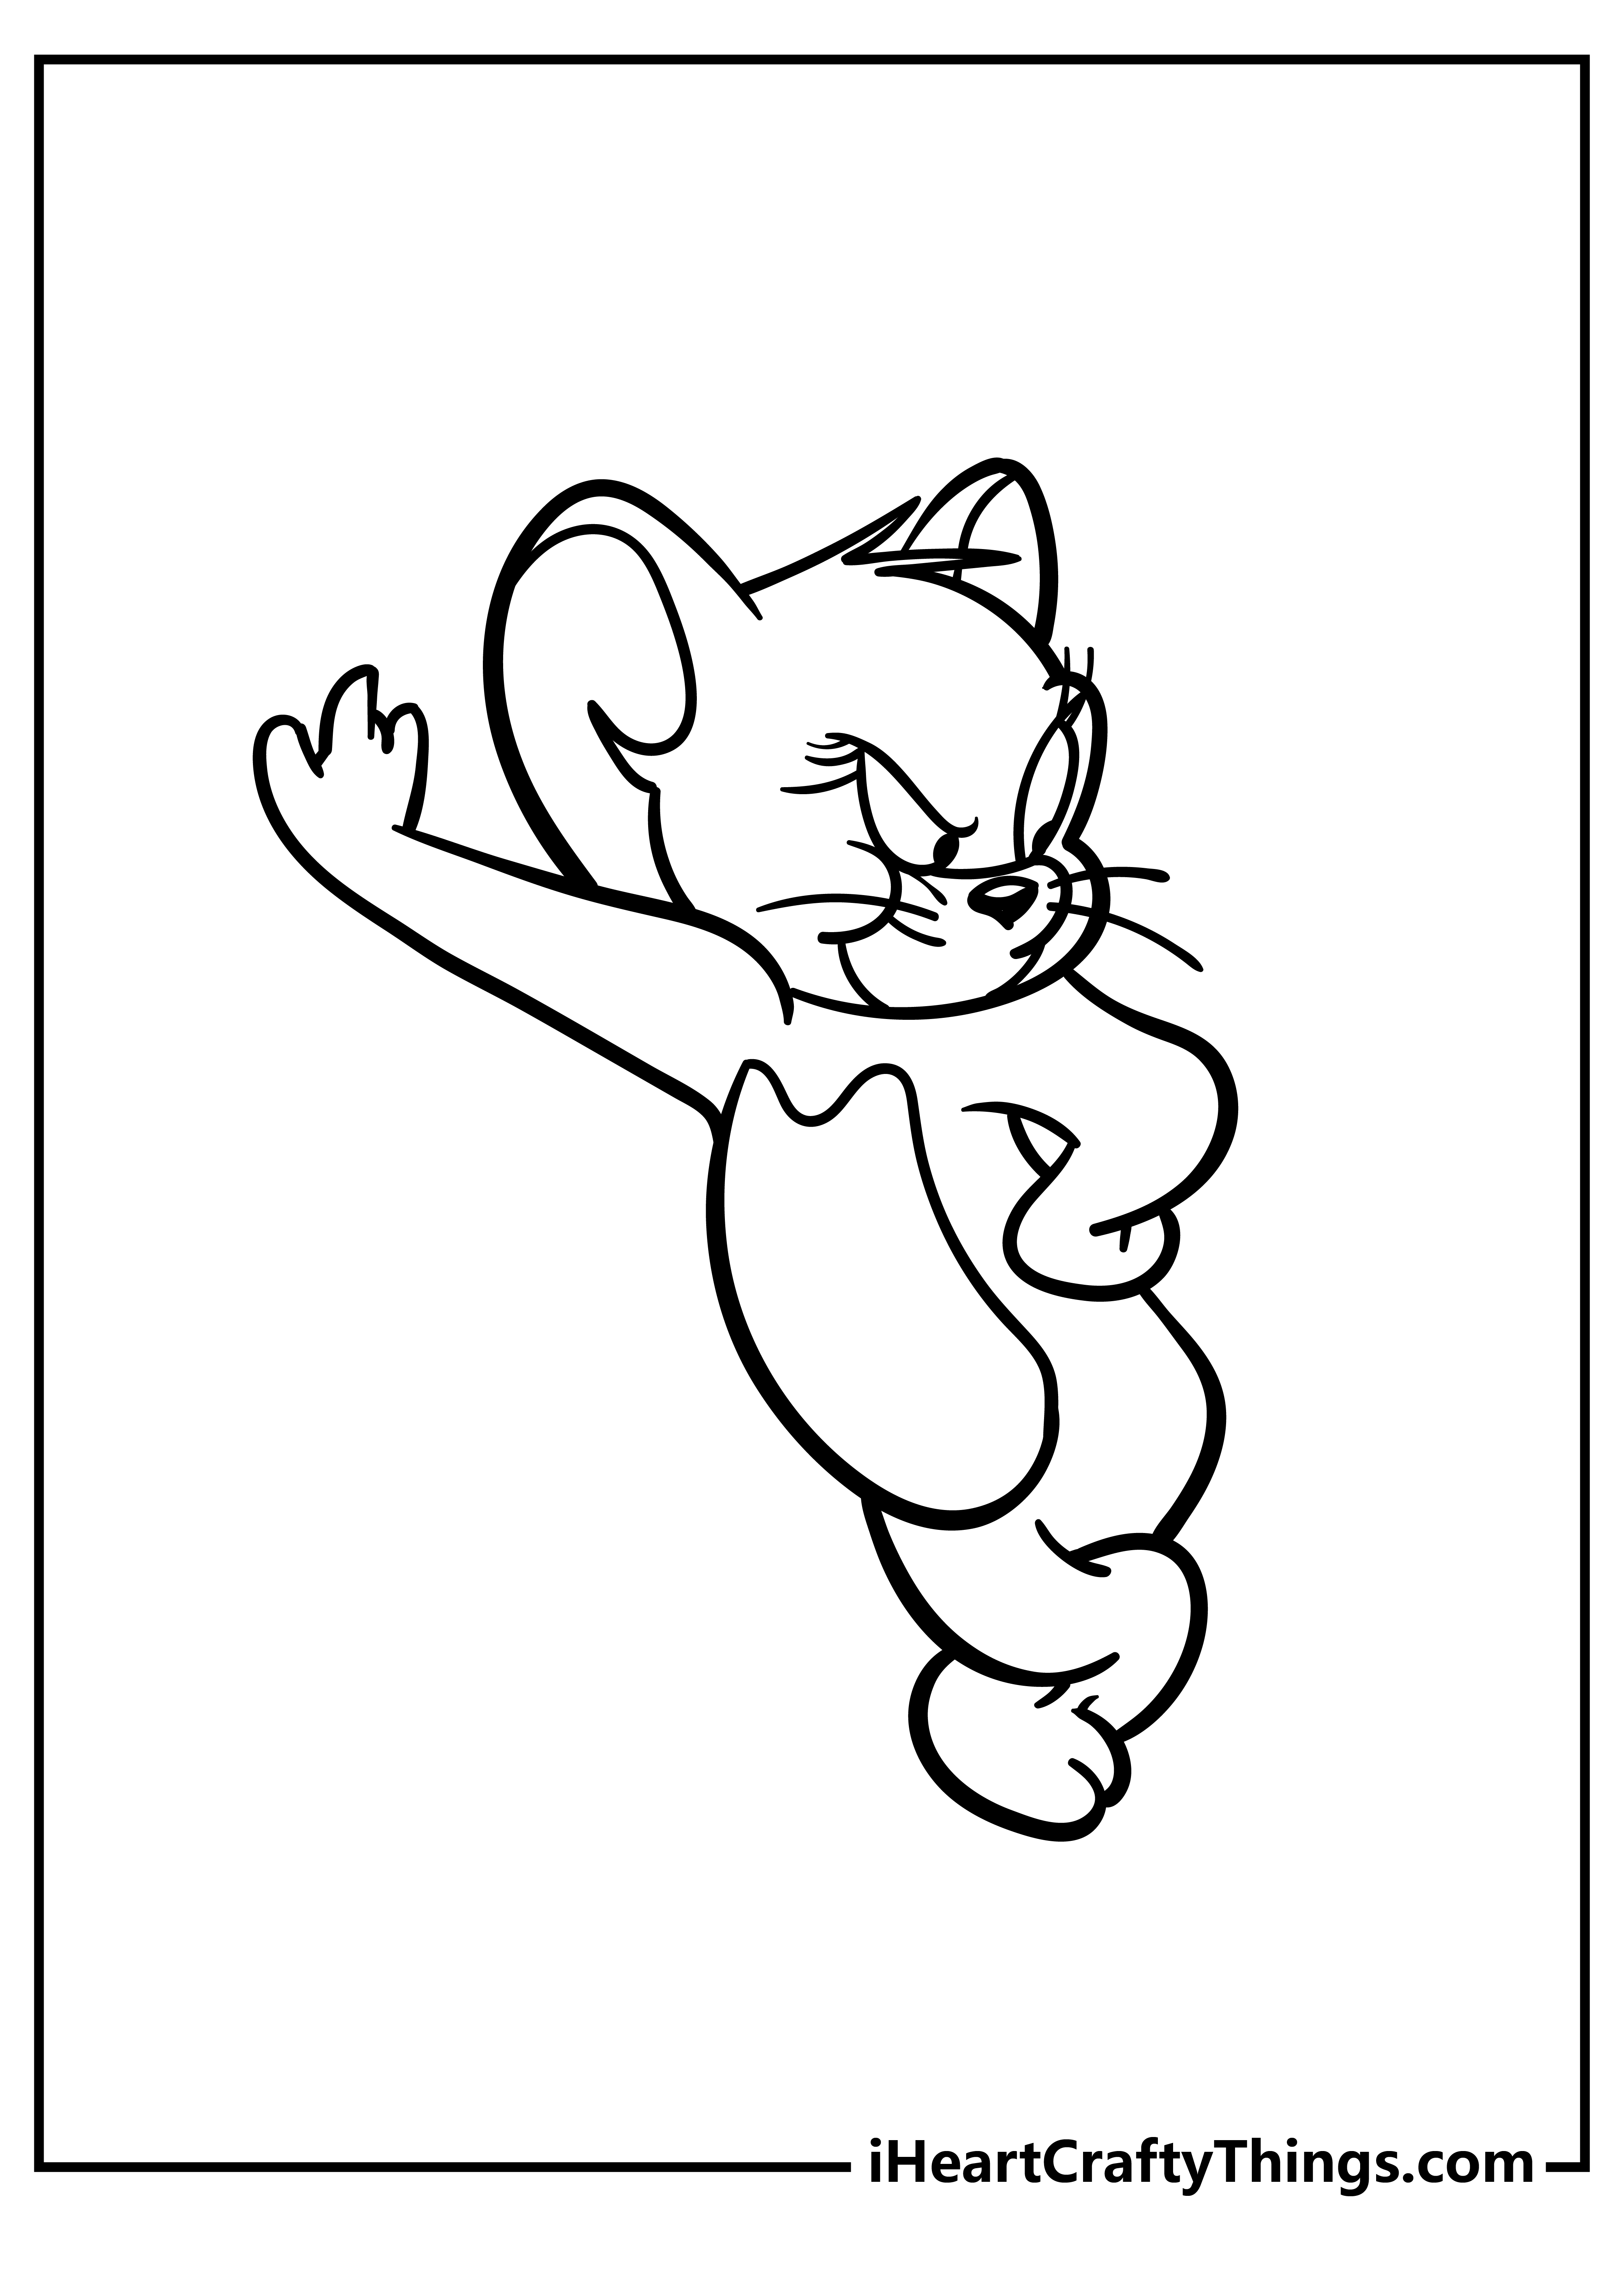 Tom and Jerry Coloring Pages for adults free printable